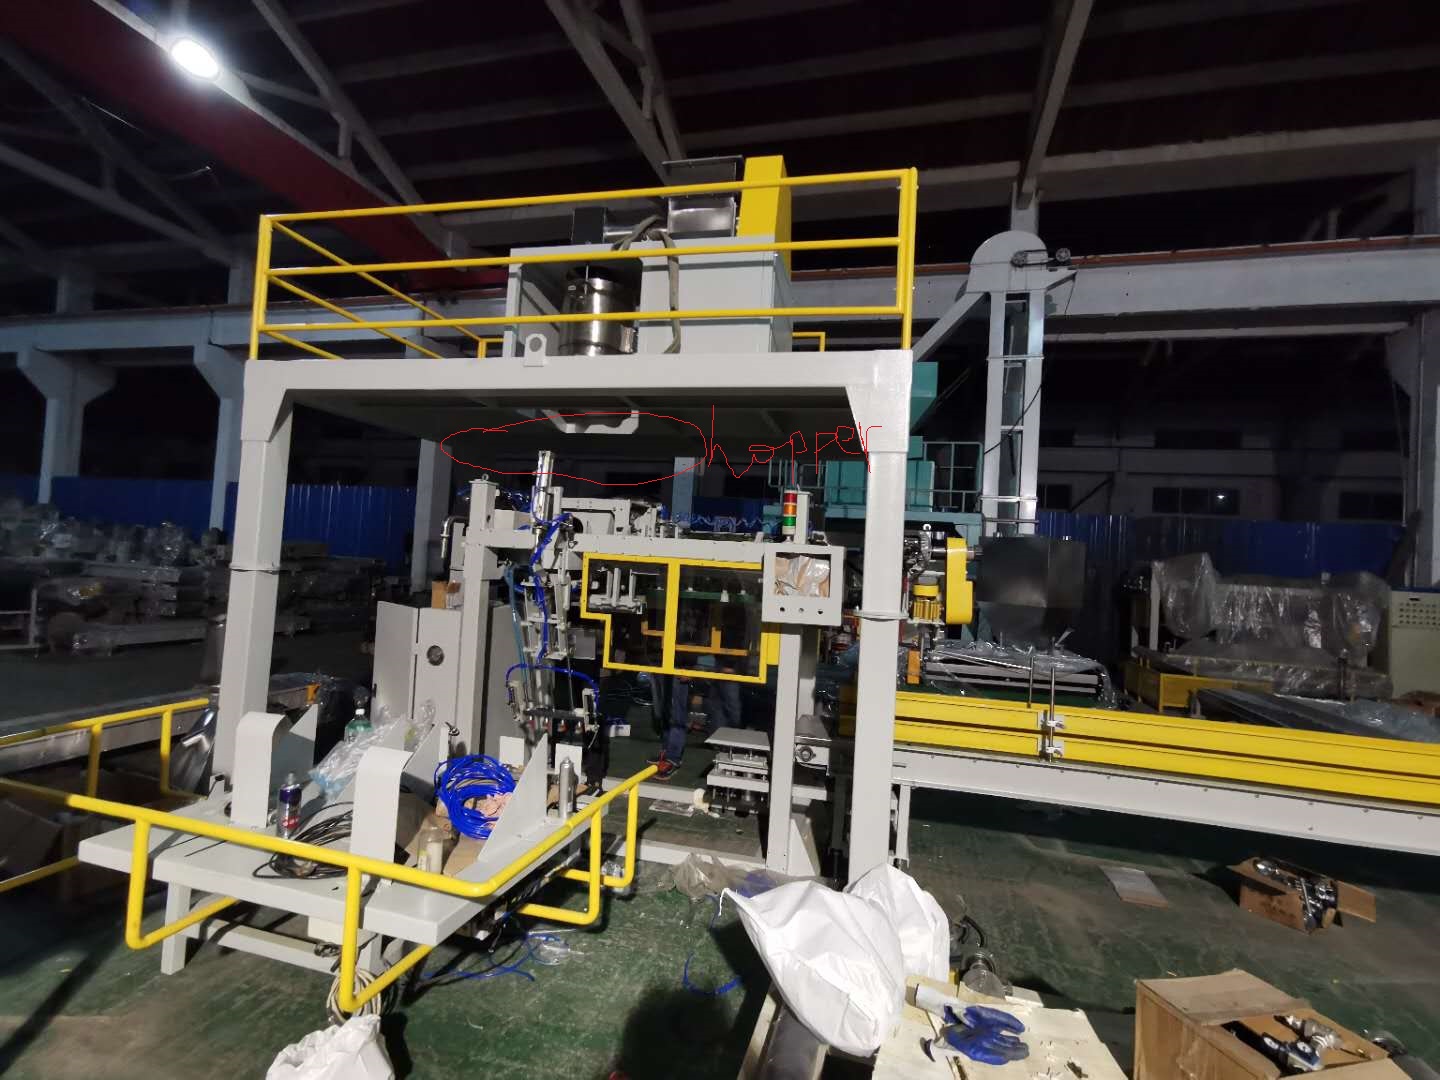 Fertilizer bagging system Fully Automatic Packing Palletizing Line Fully Automatic Packing Line Fully Automatic Bagging Line Fully Automatic filling and packaging line automated bagging system automat